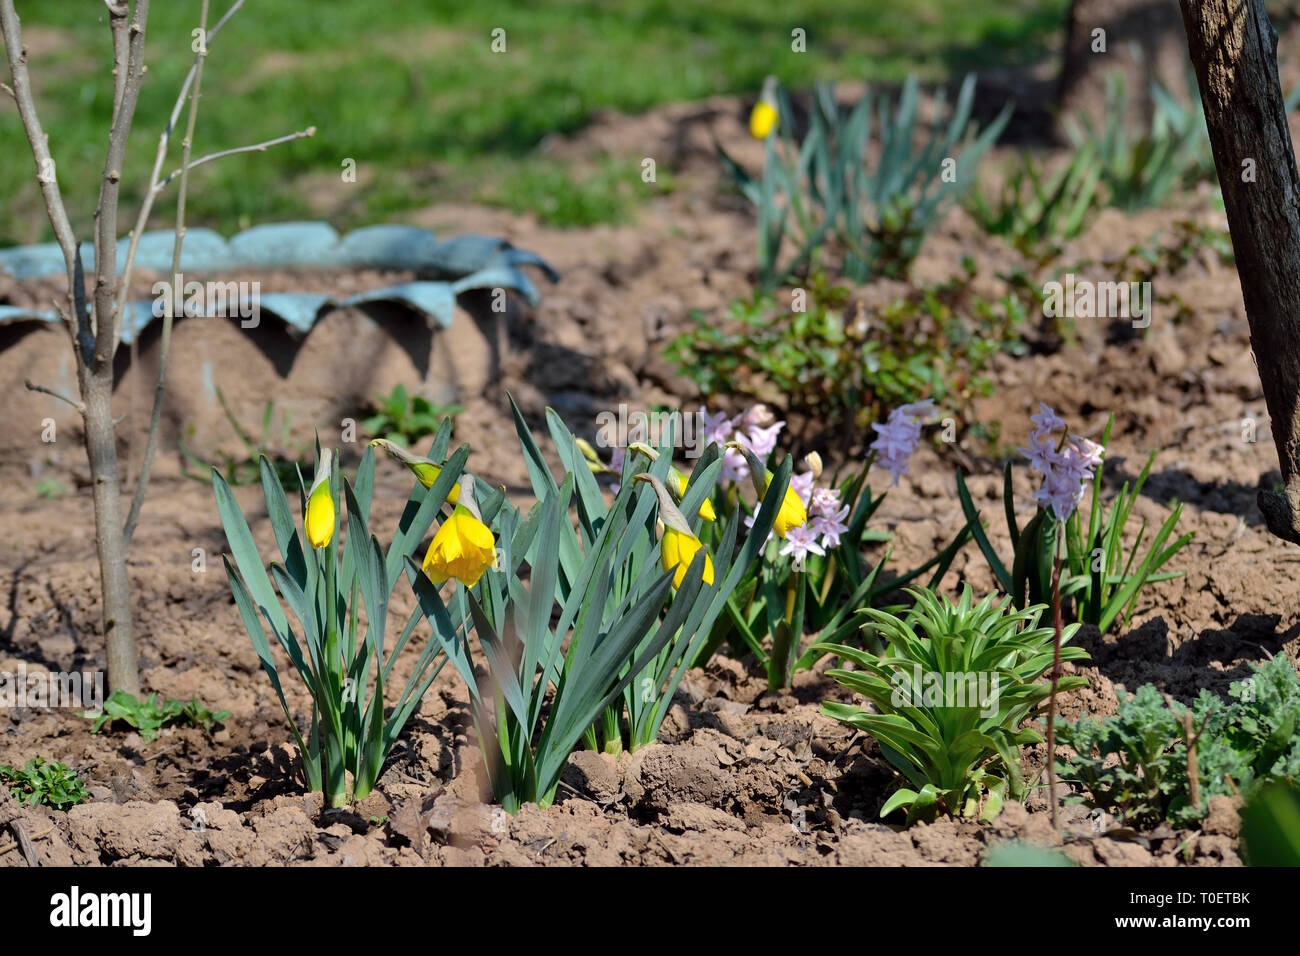 Daffodils and hyacinth in the garden Stock Photo